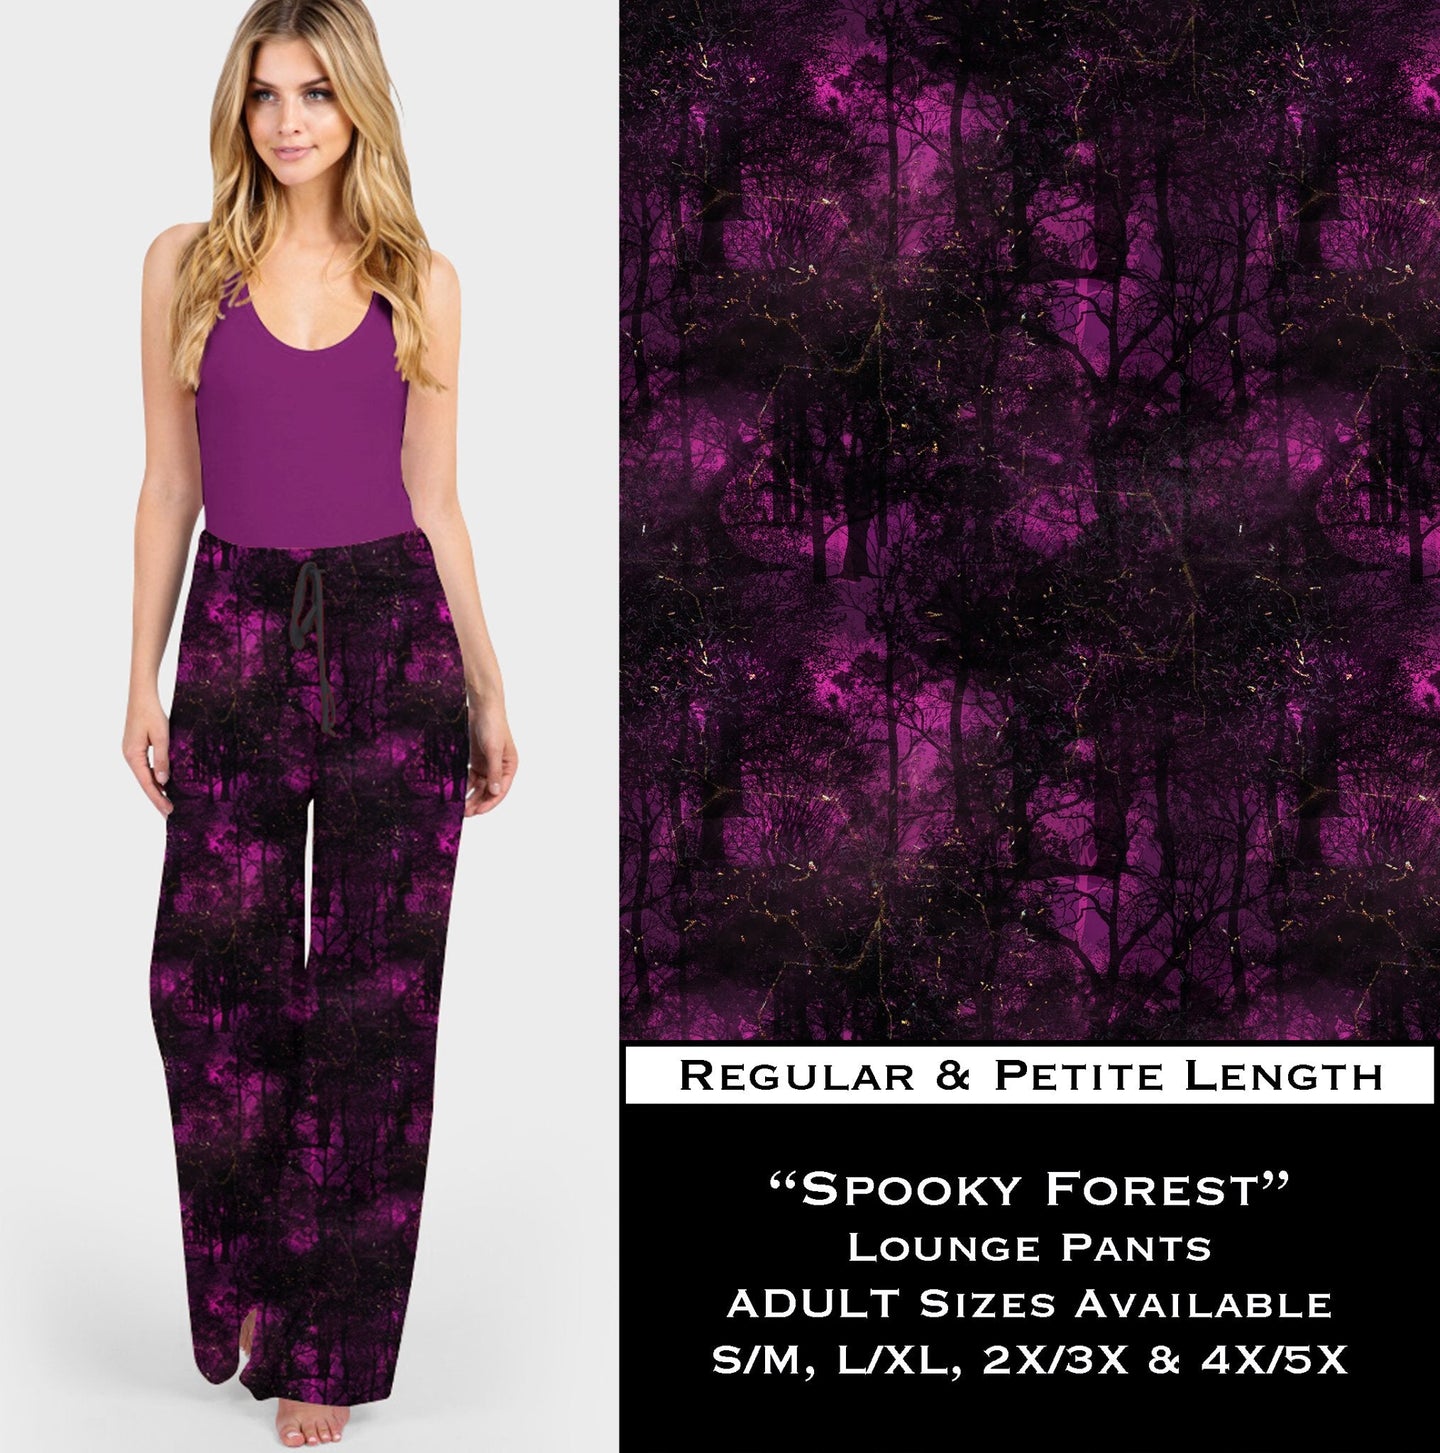 B121 - Spooky Forest Lounge Pants